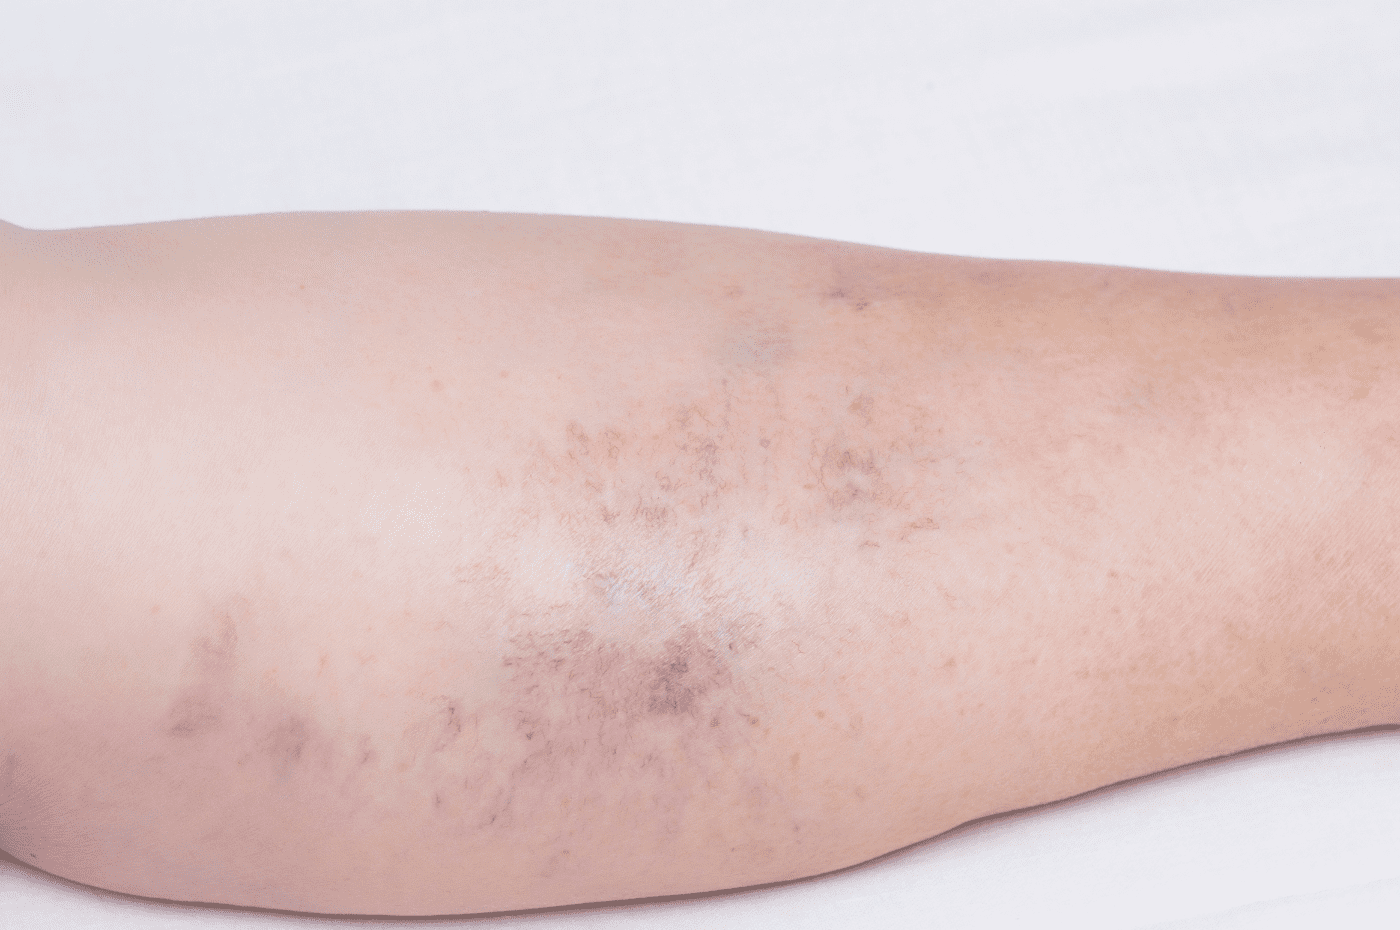 Venous insufficiency in Westminster, Co